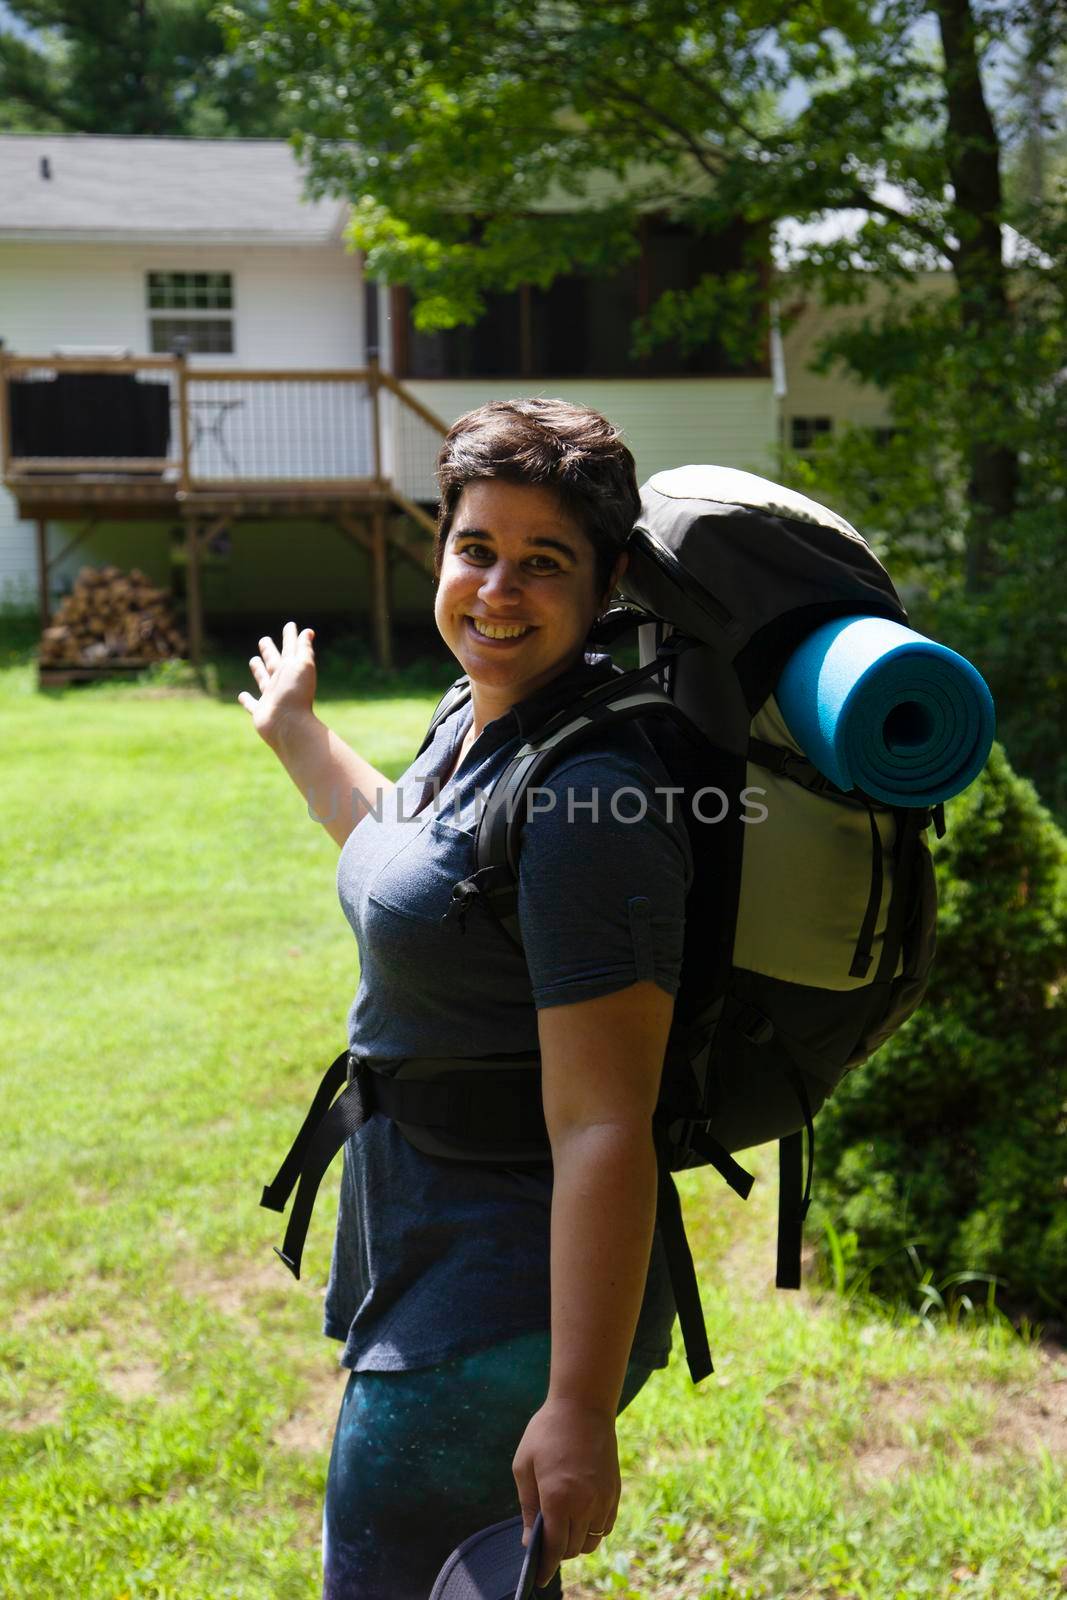 person with a backpack is smiling and ready to leave home on an adventure 